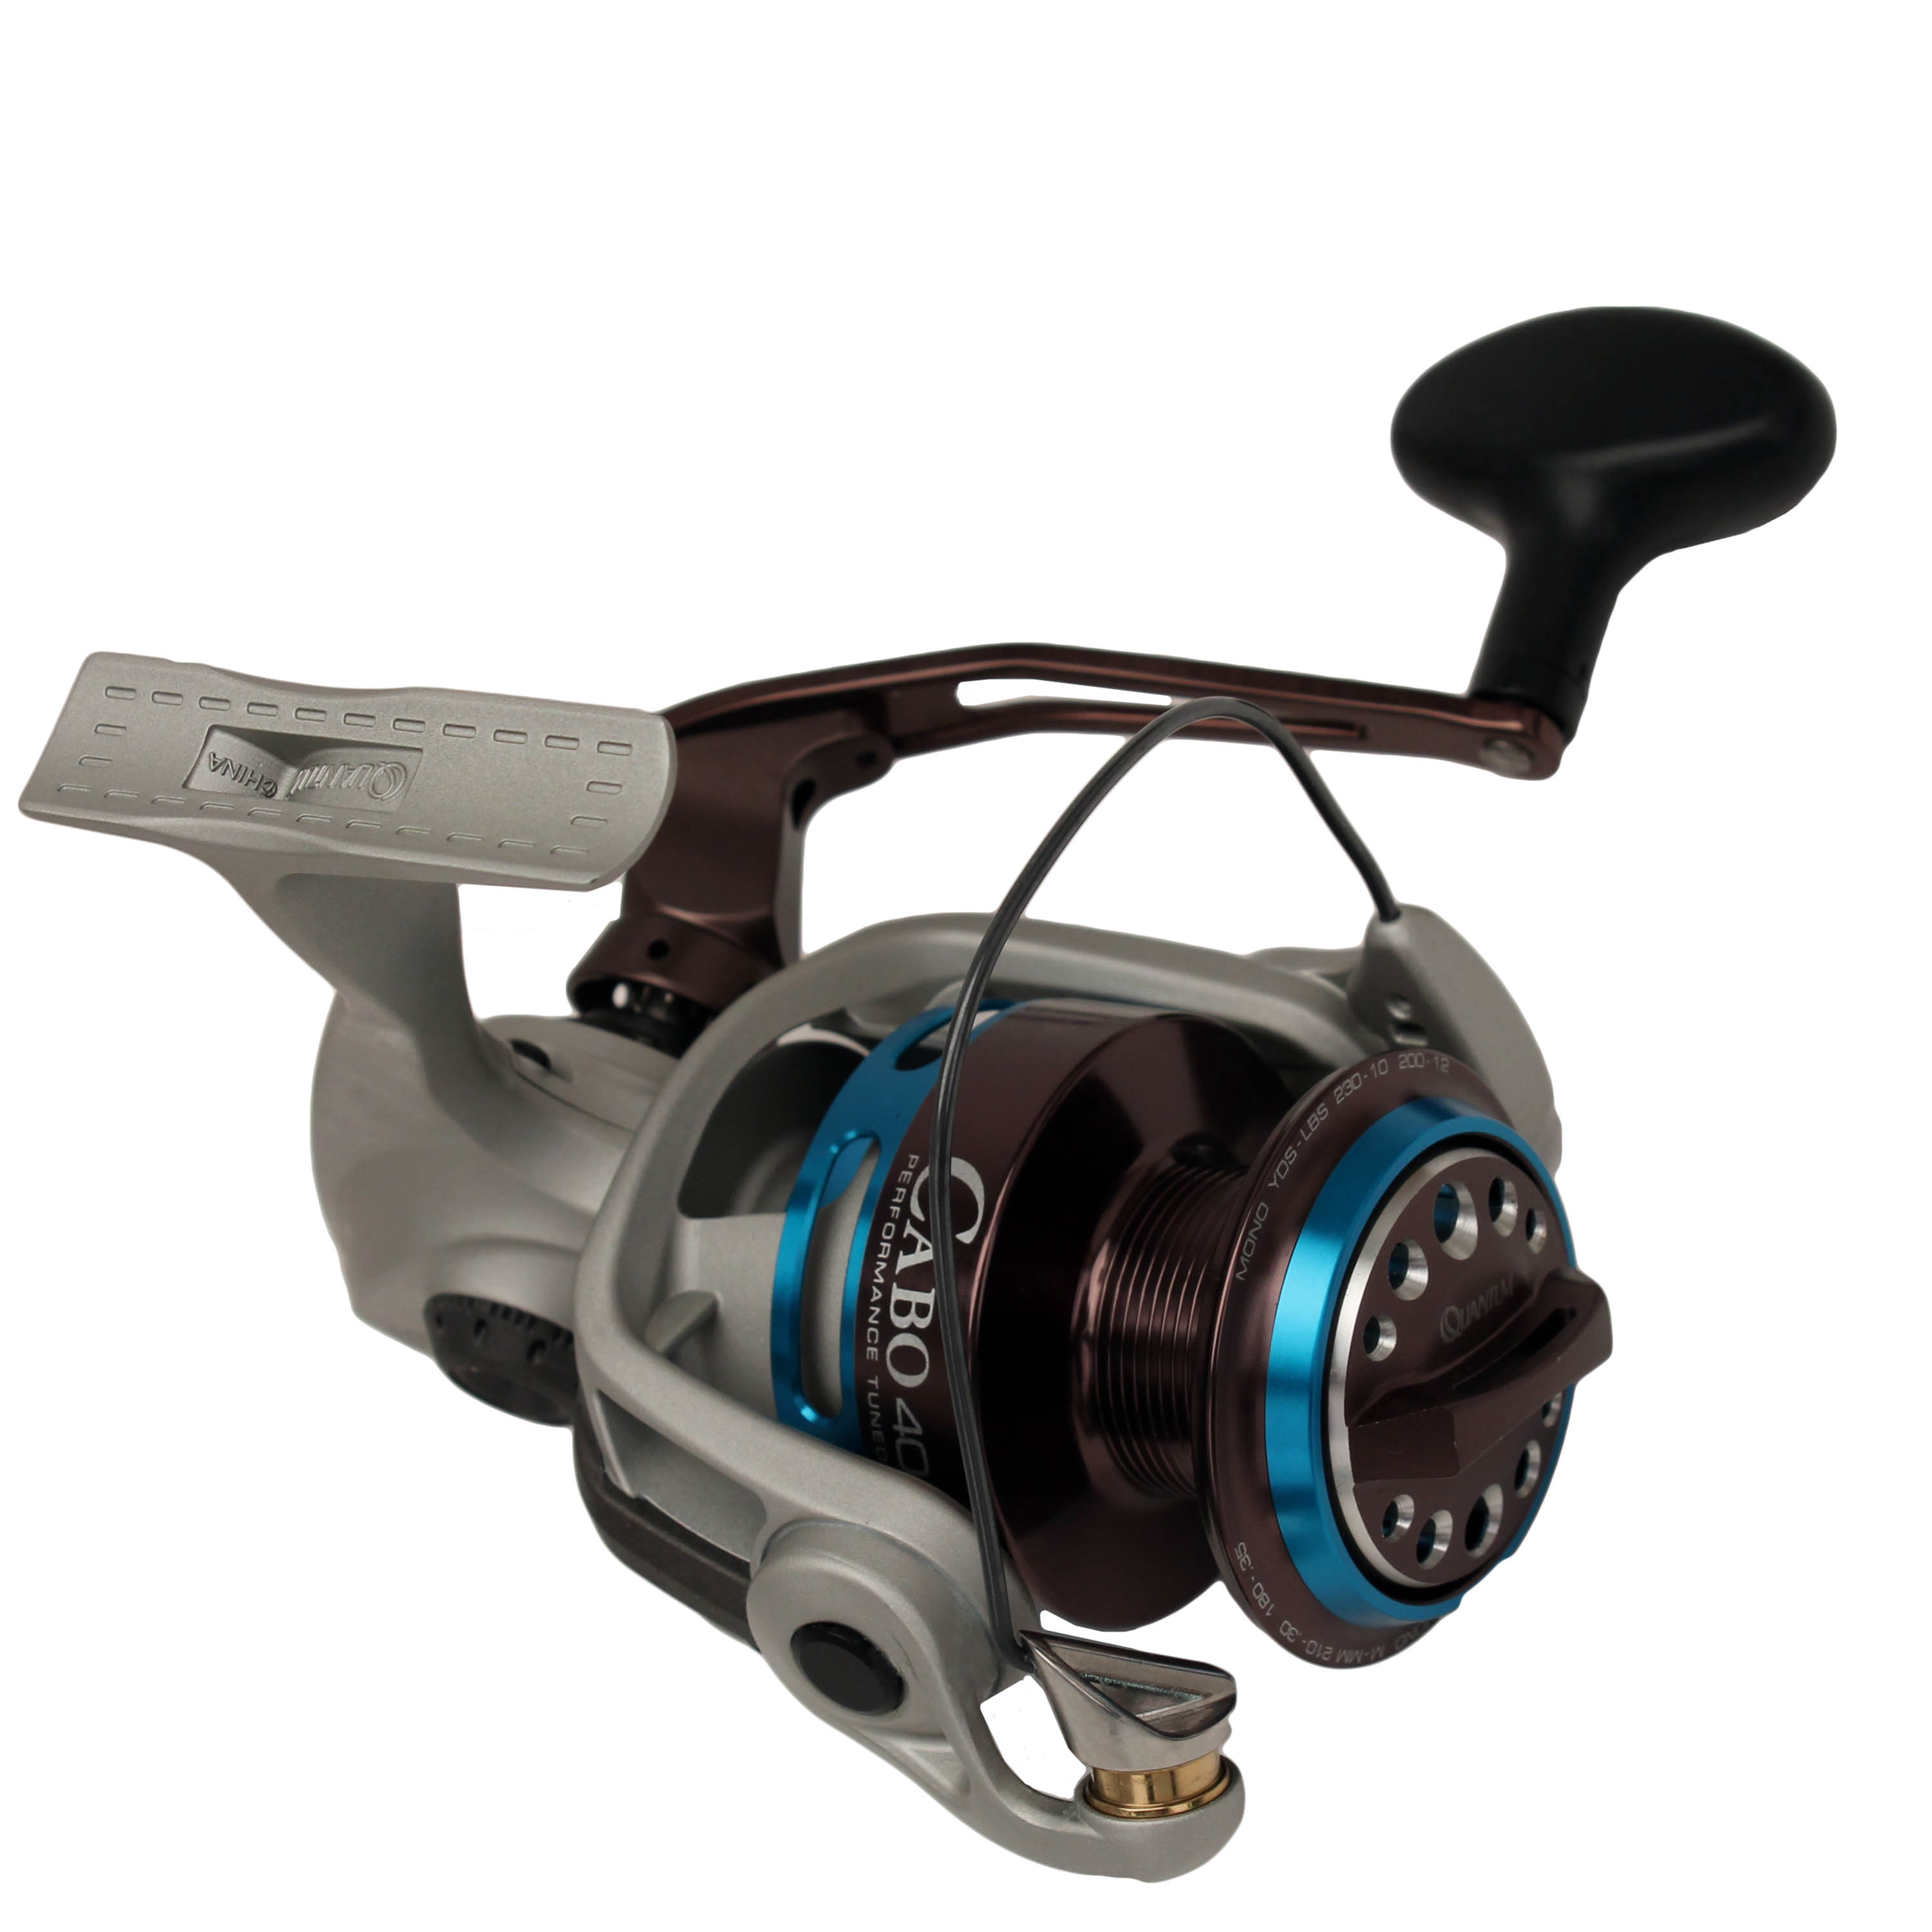 Reel spin. Катушка Zebco cool. Mitchell: Spincast Reel Turbo Spin 30 -1/0. Катушка для нахлыста Zebco cool. Spinning Reel.